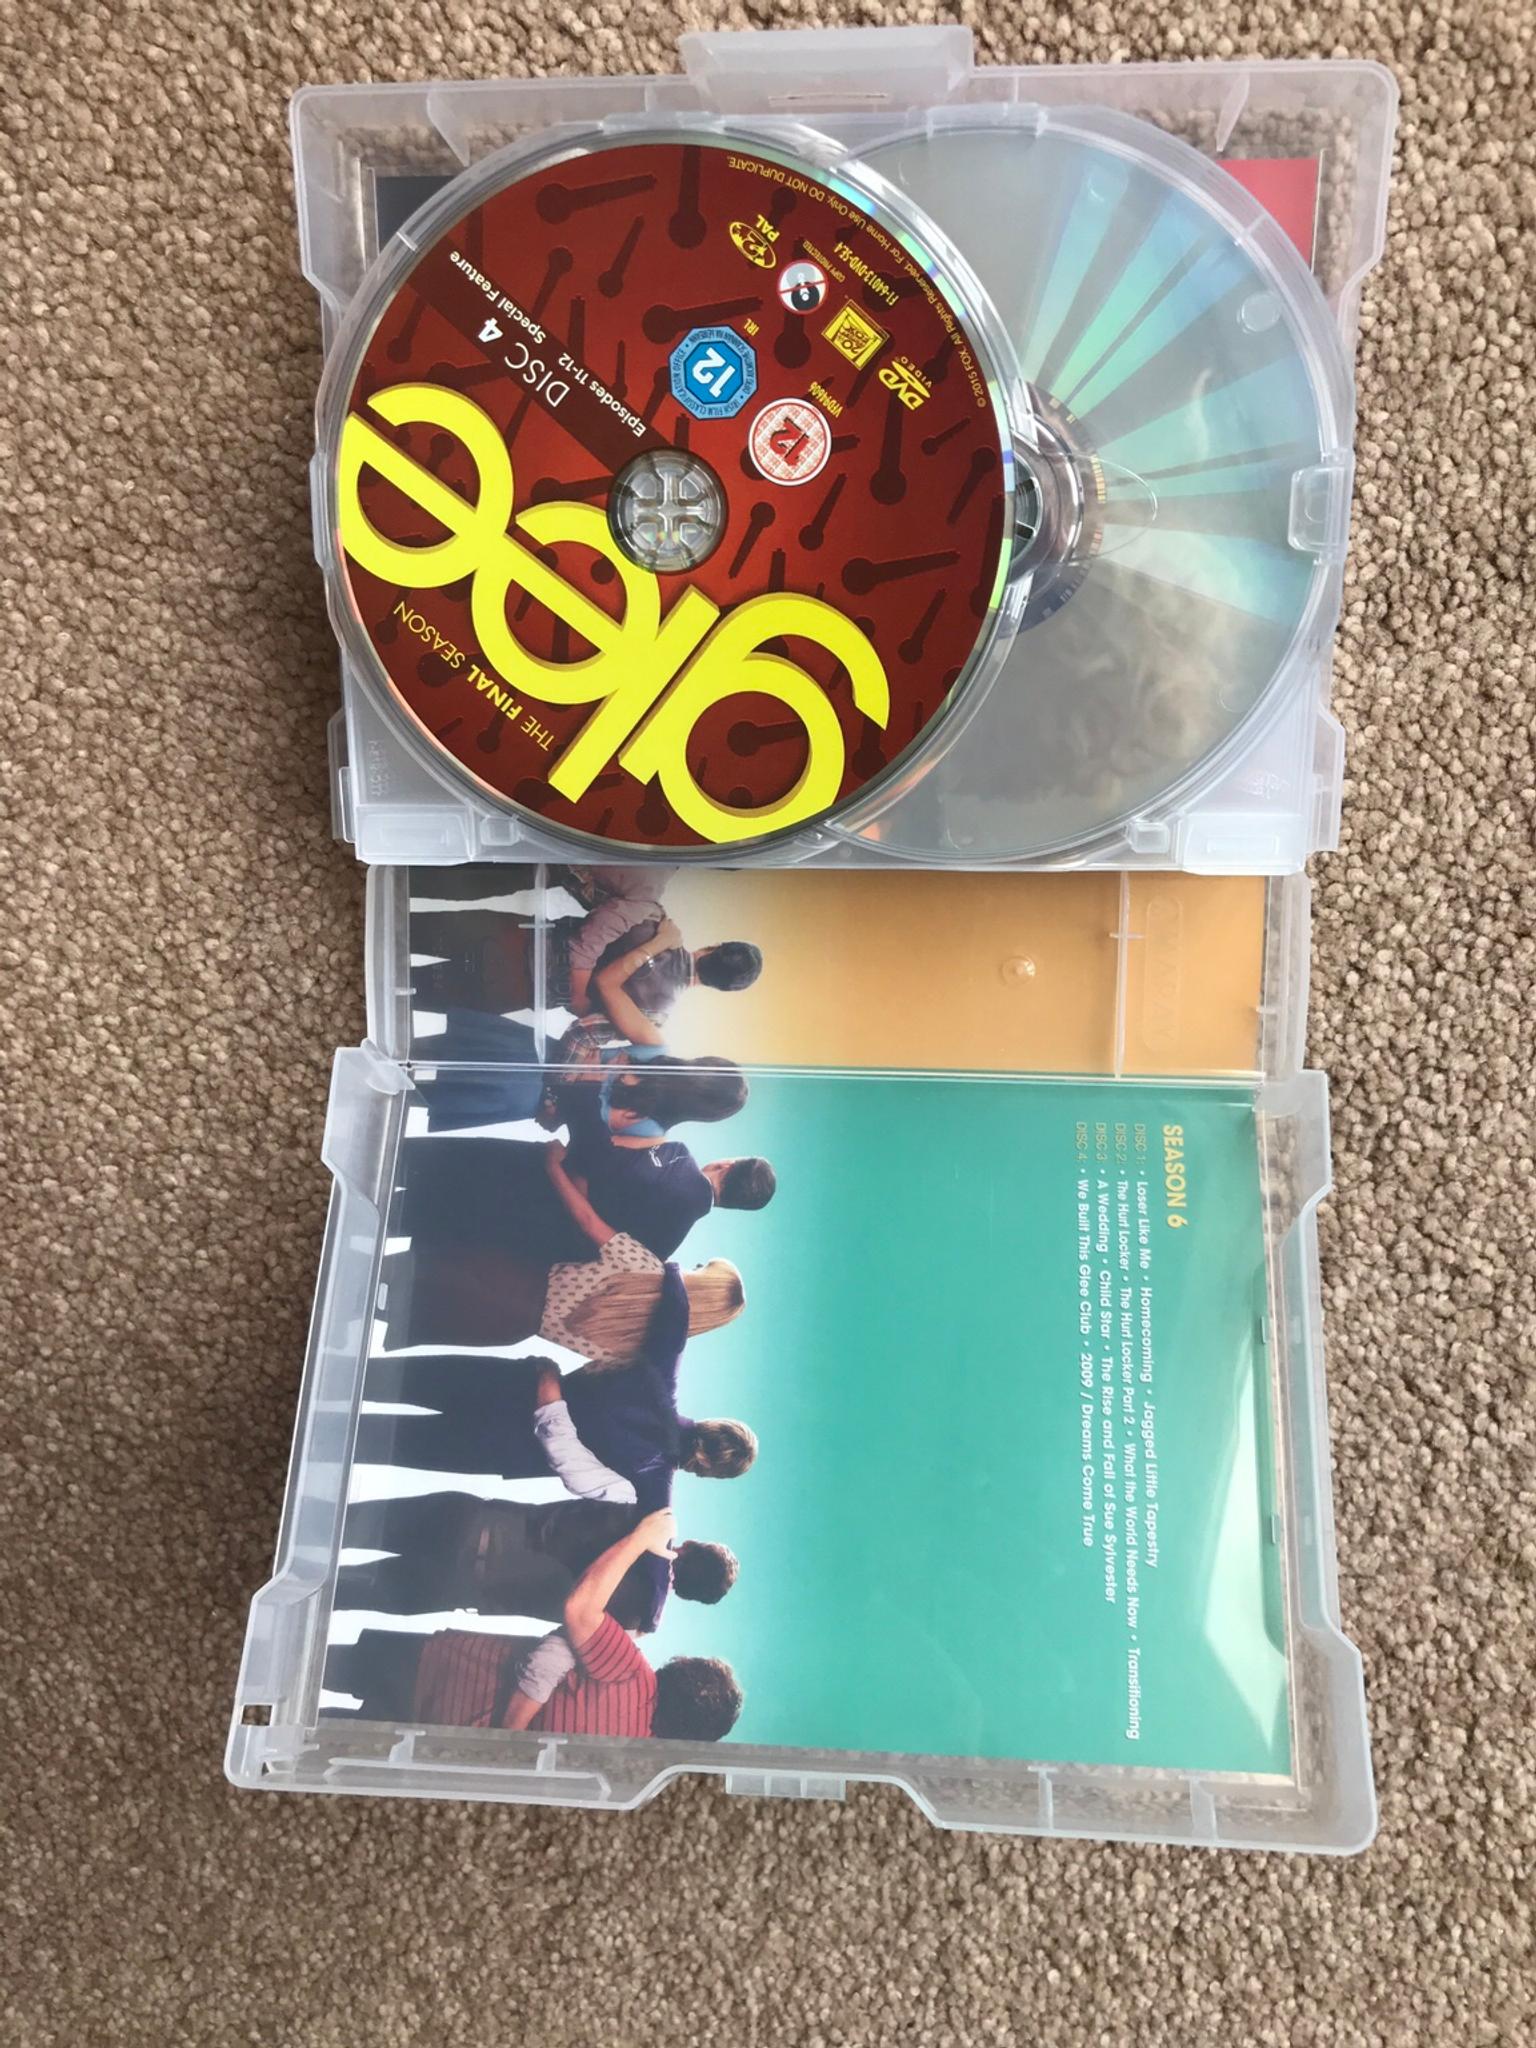 New Glee Complete Box Set Seasons 1 6 In Me12 Swale For 40 00 For Sale Shpock